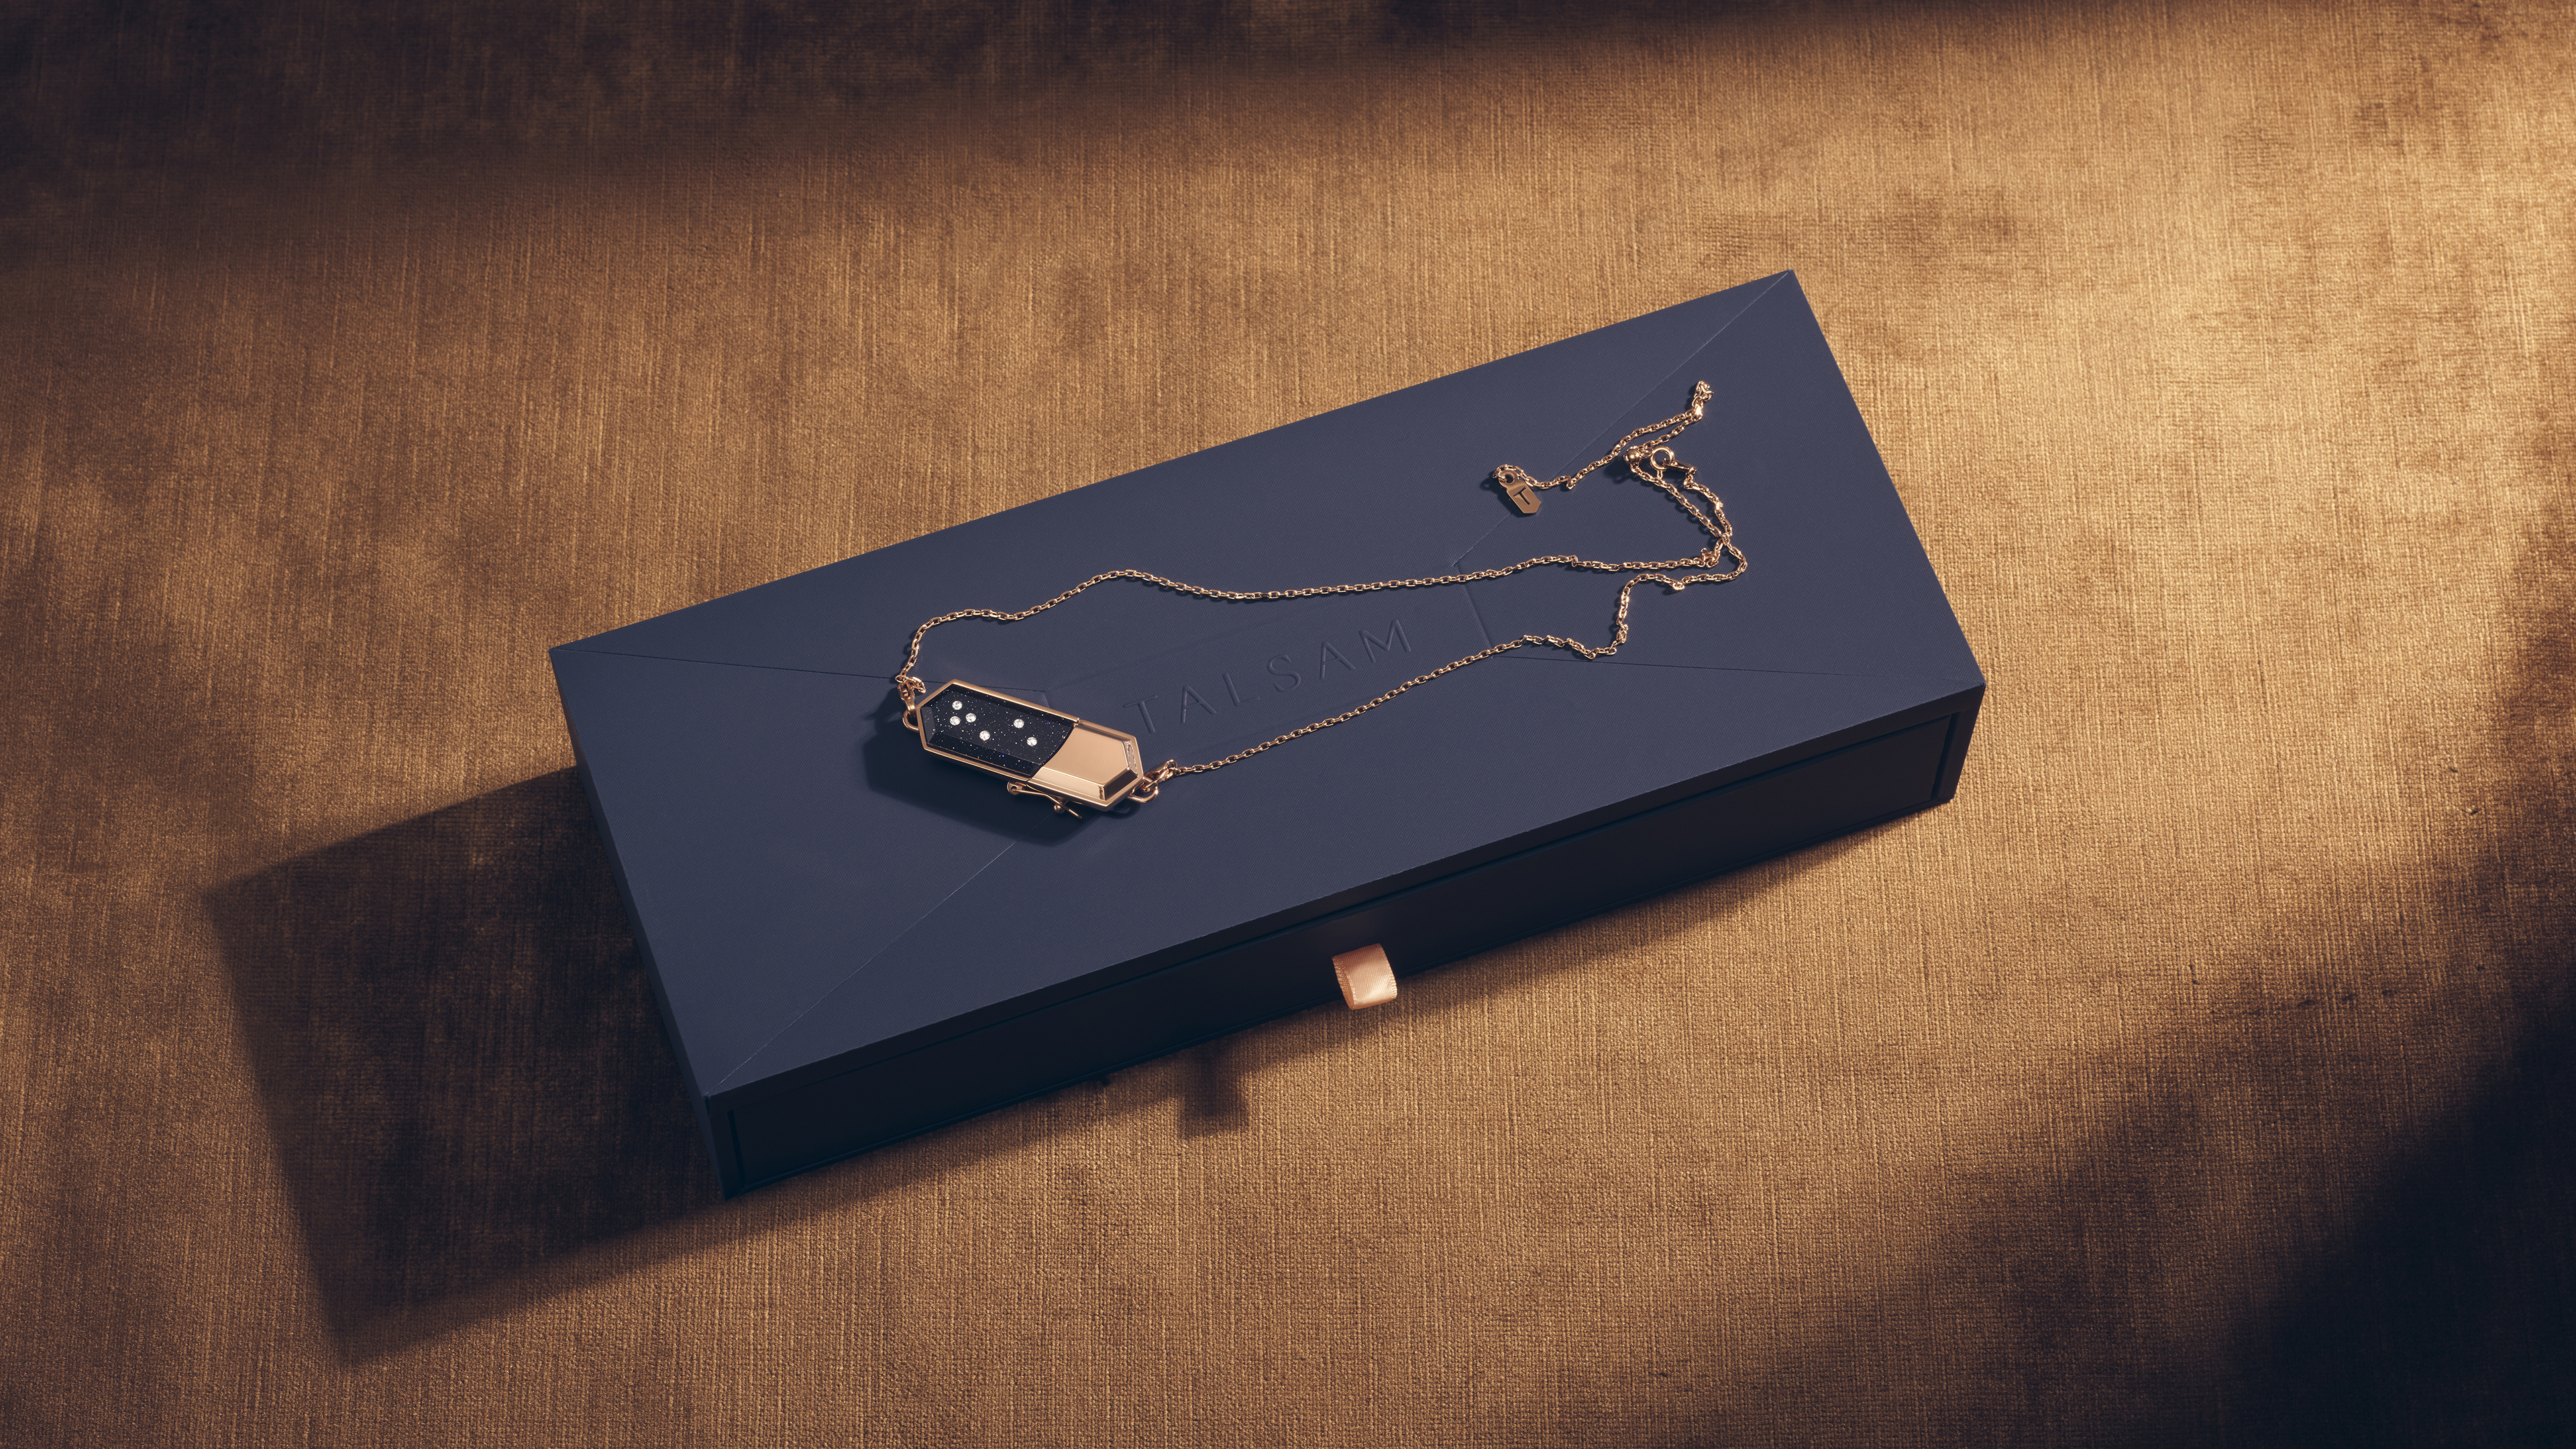 Talsam Smart Jewelry Has Even Smarter Packaging